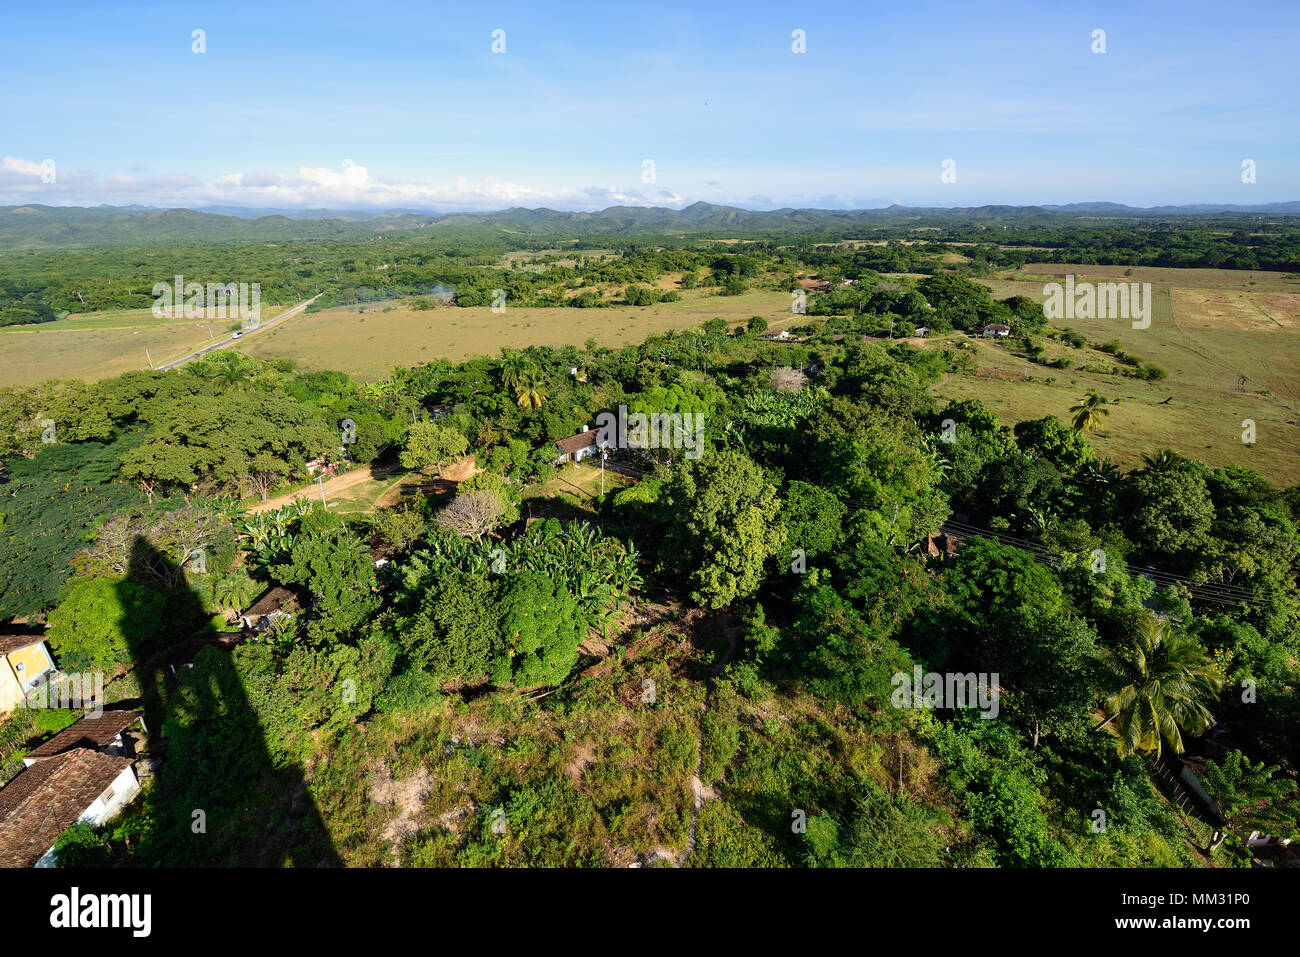 View from the tower on the Valle de los Ingenios valley on the sugar plantation Stock Photo